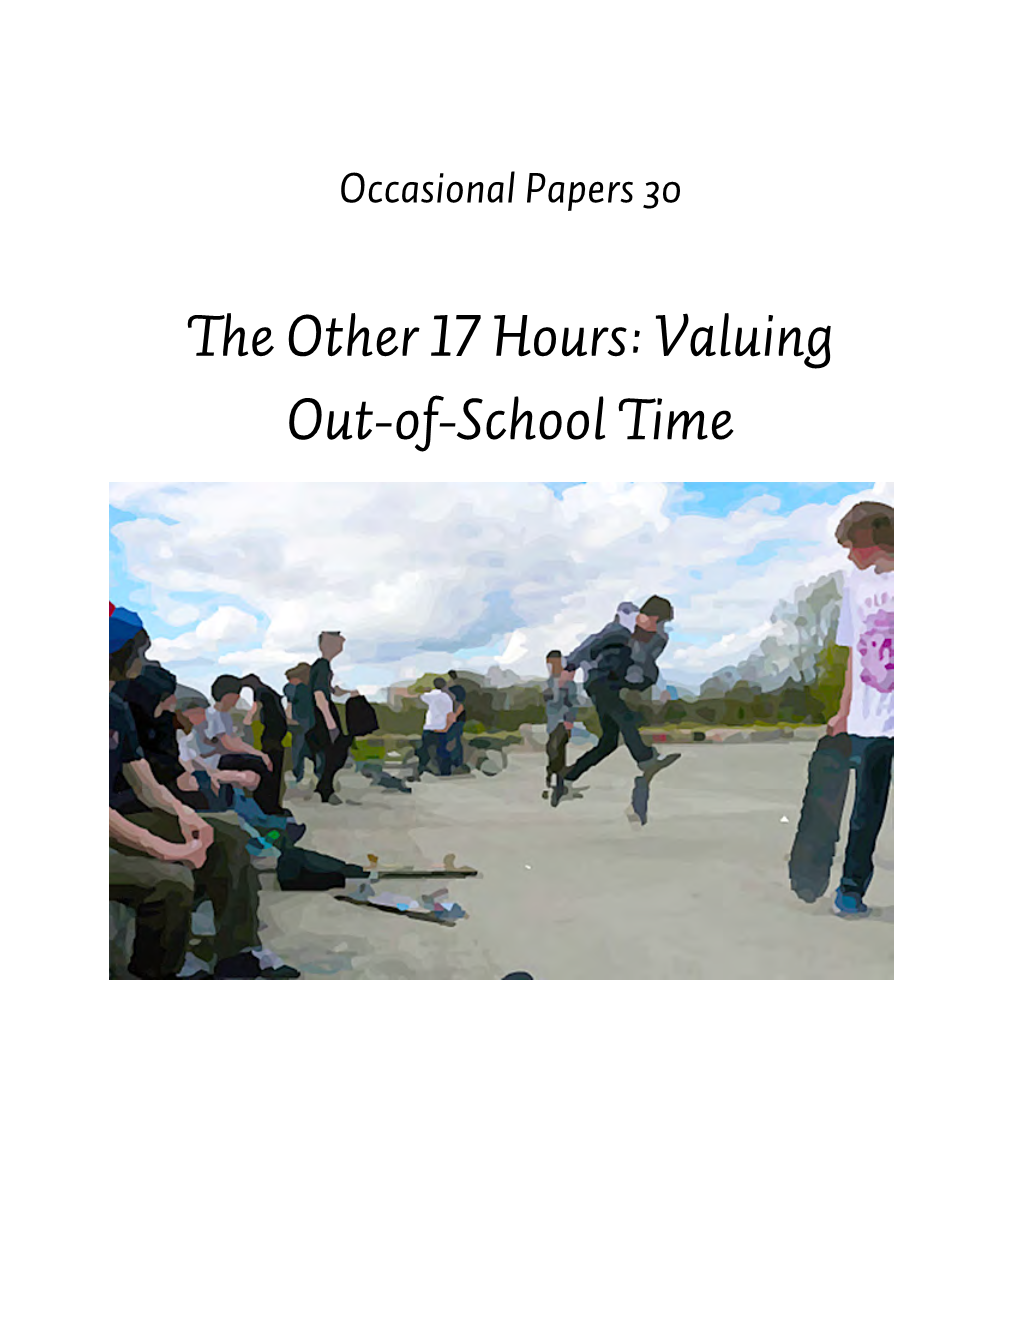 Valuing Out-Of-School Time